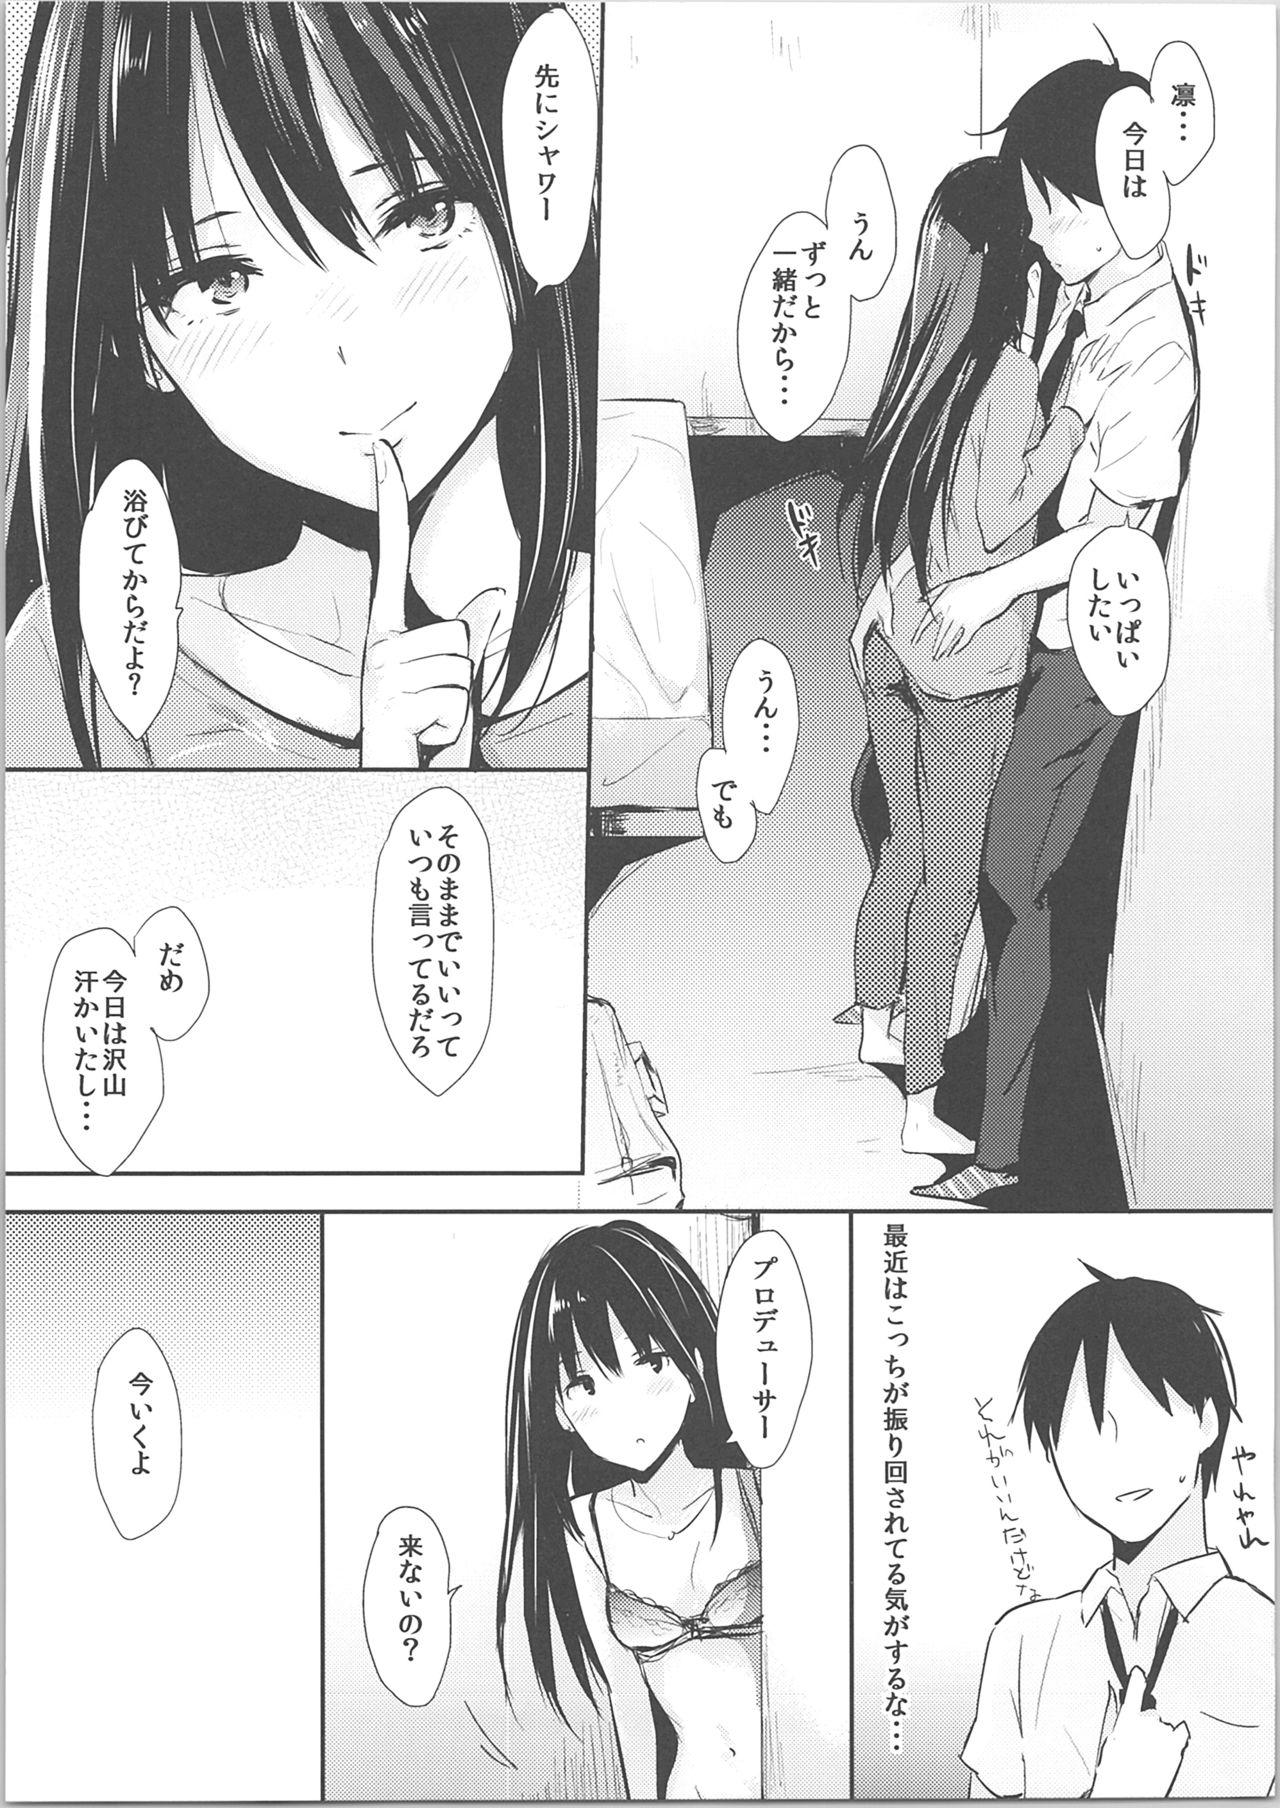 Handsome Shiburin-ppoi no! 2 - The idolmaster Pervert - Page 6